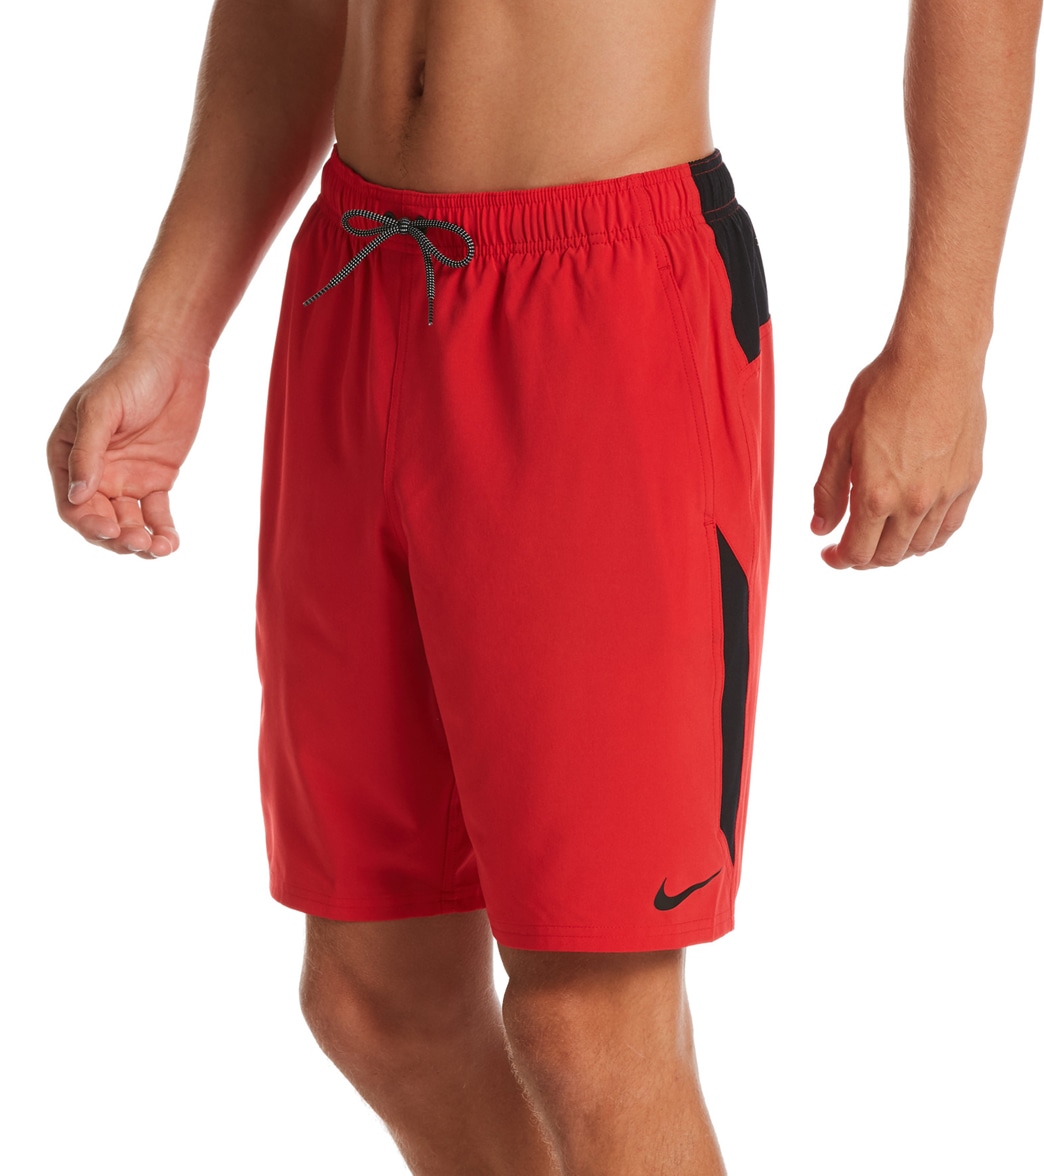 Nike Men's 20 Contend Volley Short Extended Size - University Red 3Xl Polyester - Swimoutlet.com